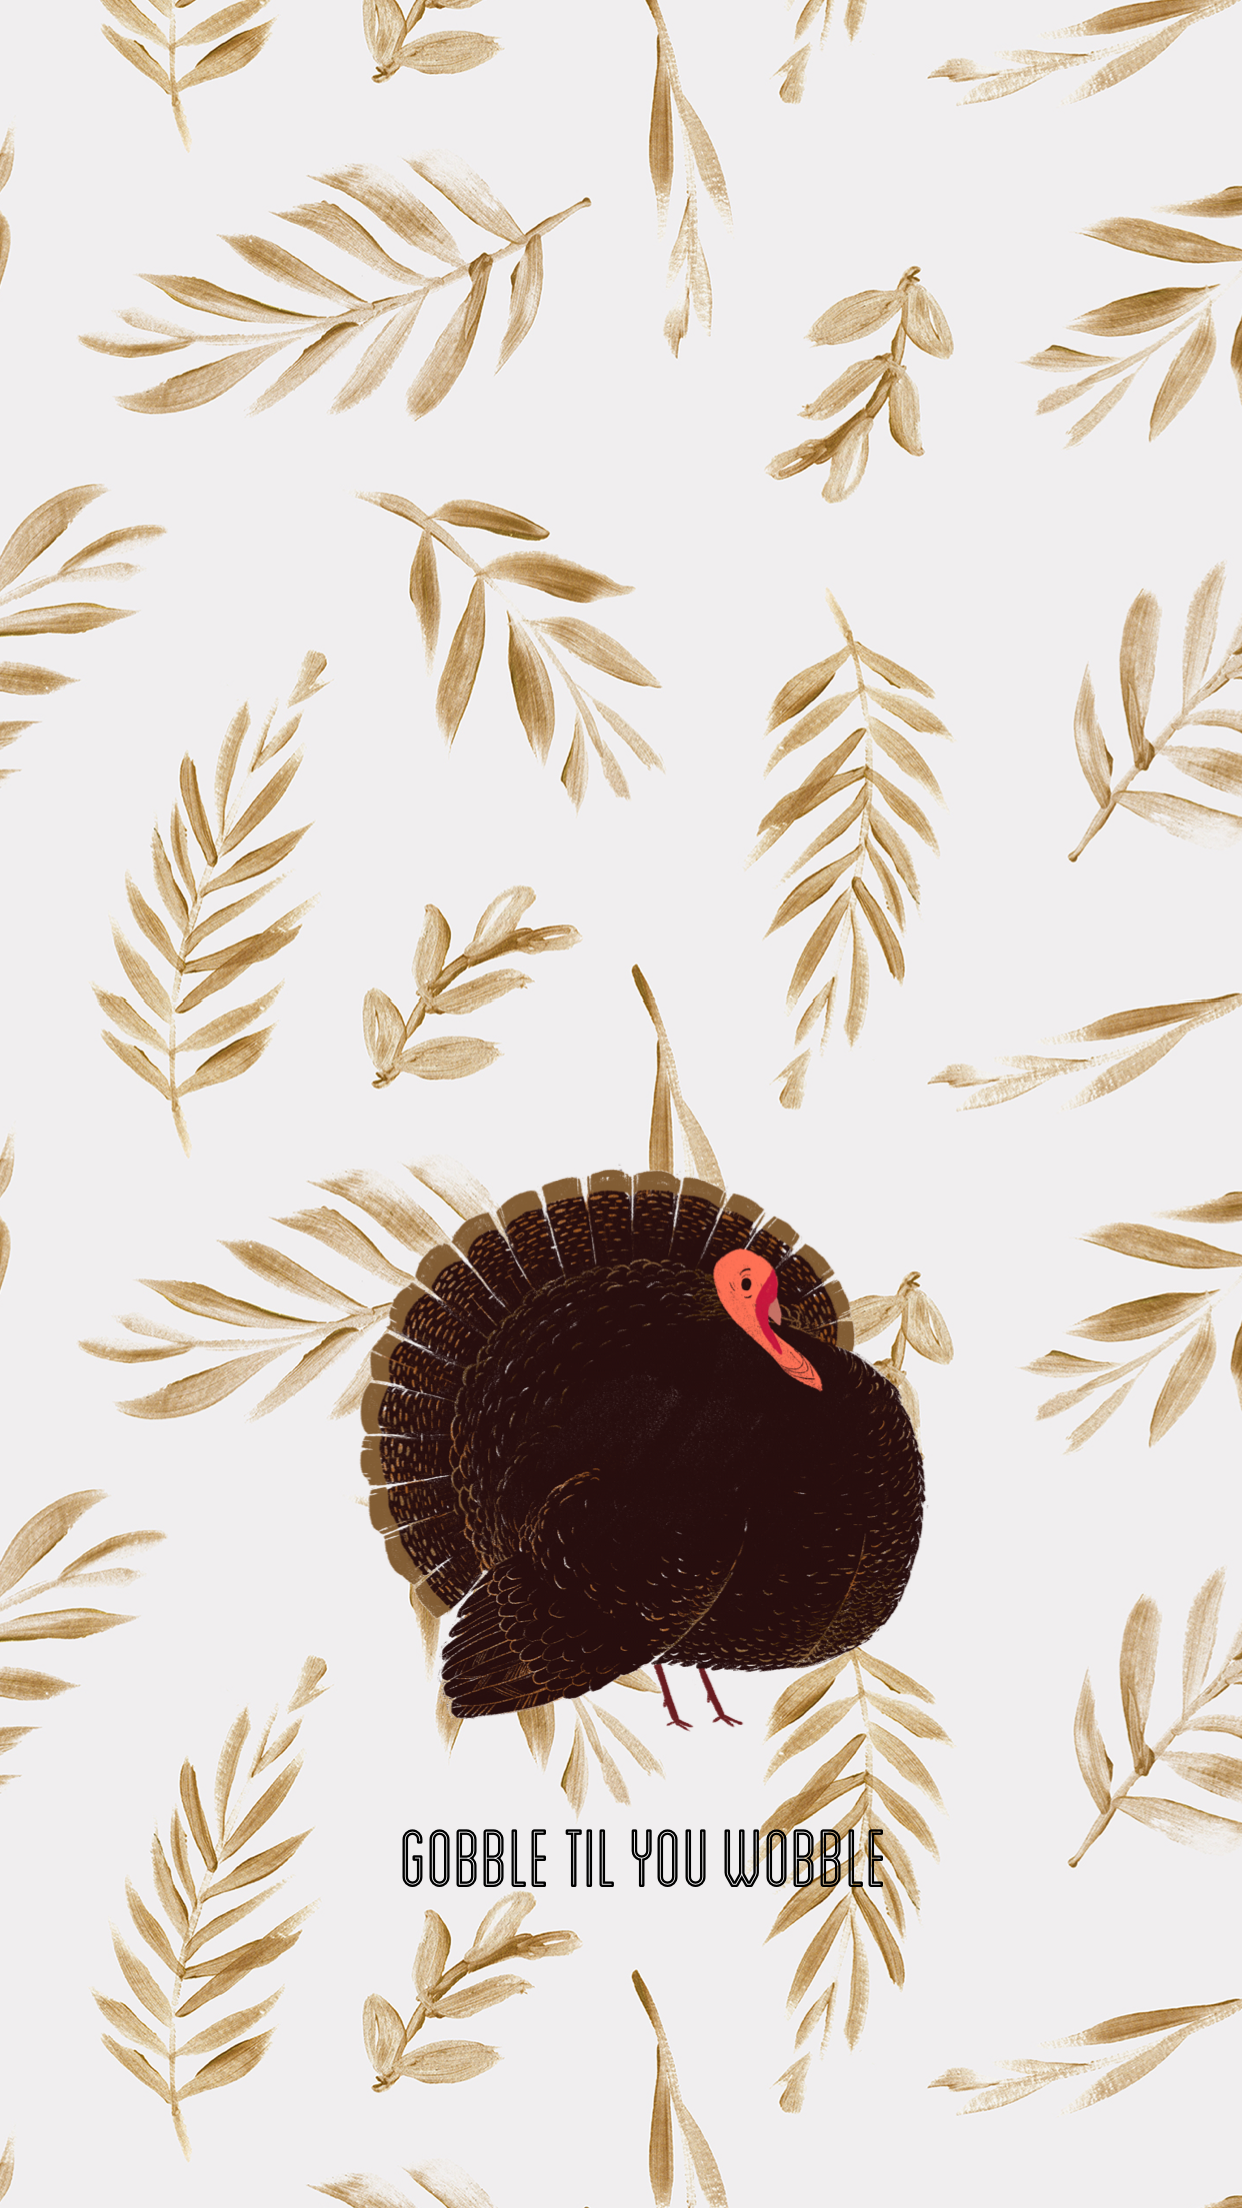 Arvo Phone Backgrounds and Wallpapers -   19 thanksgiving wallpaper ideas